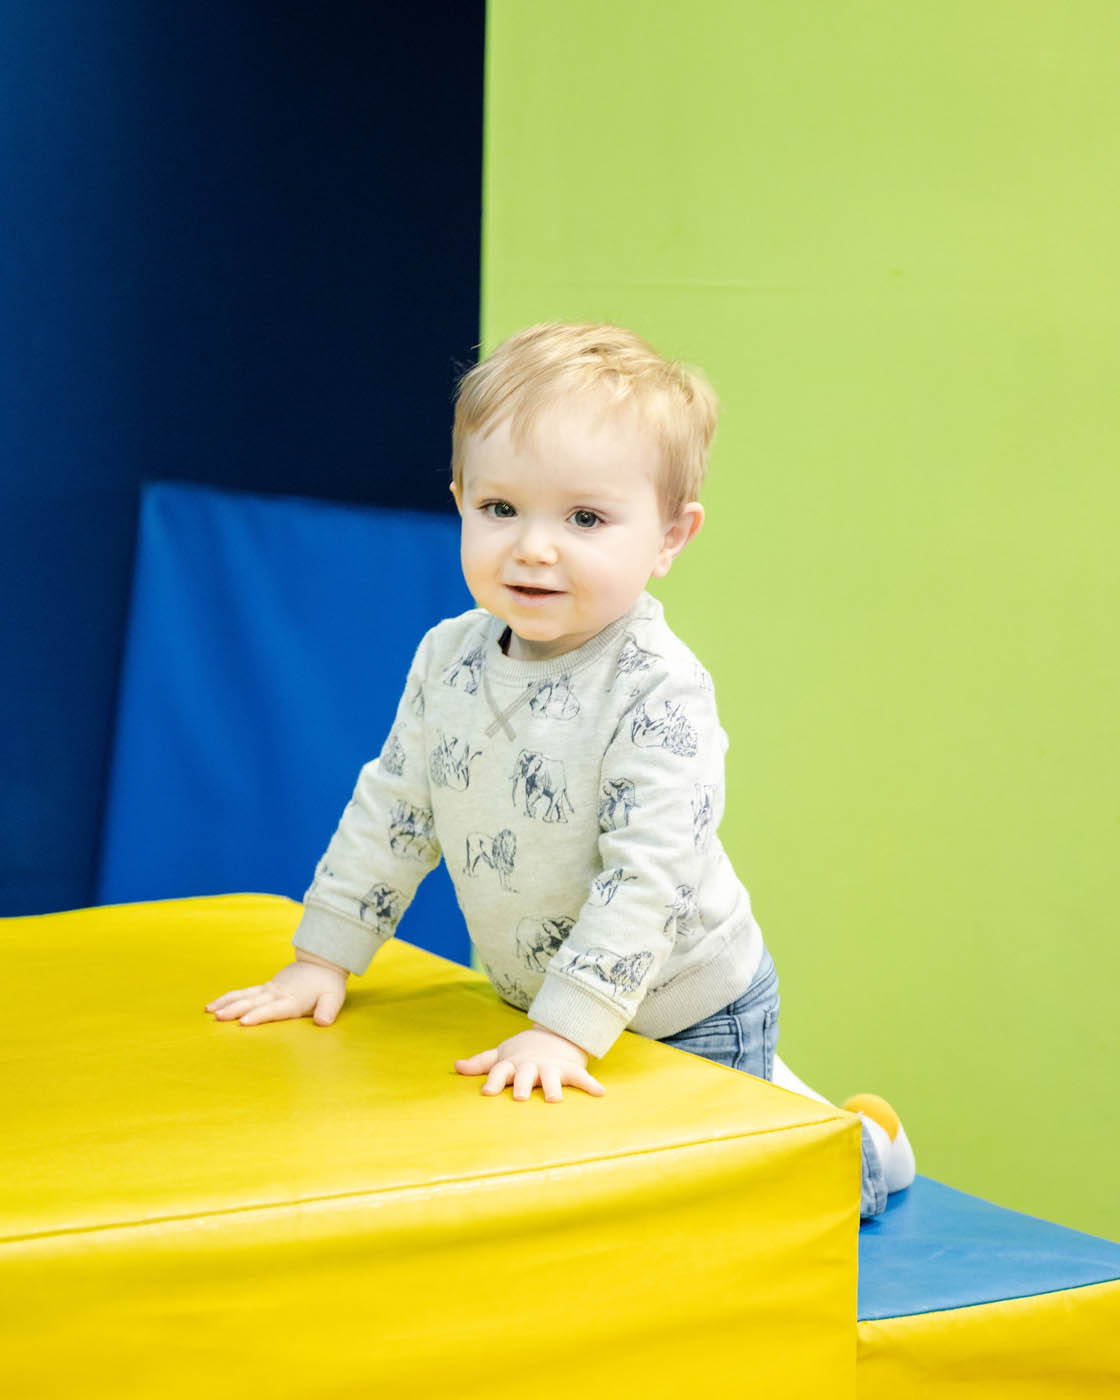 A young boy climbing on some age appropriate gym equipment at a Charlotte toddler tumbling class.